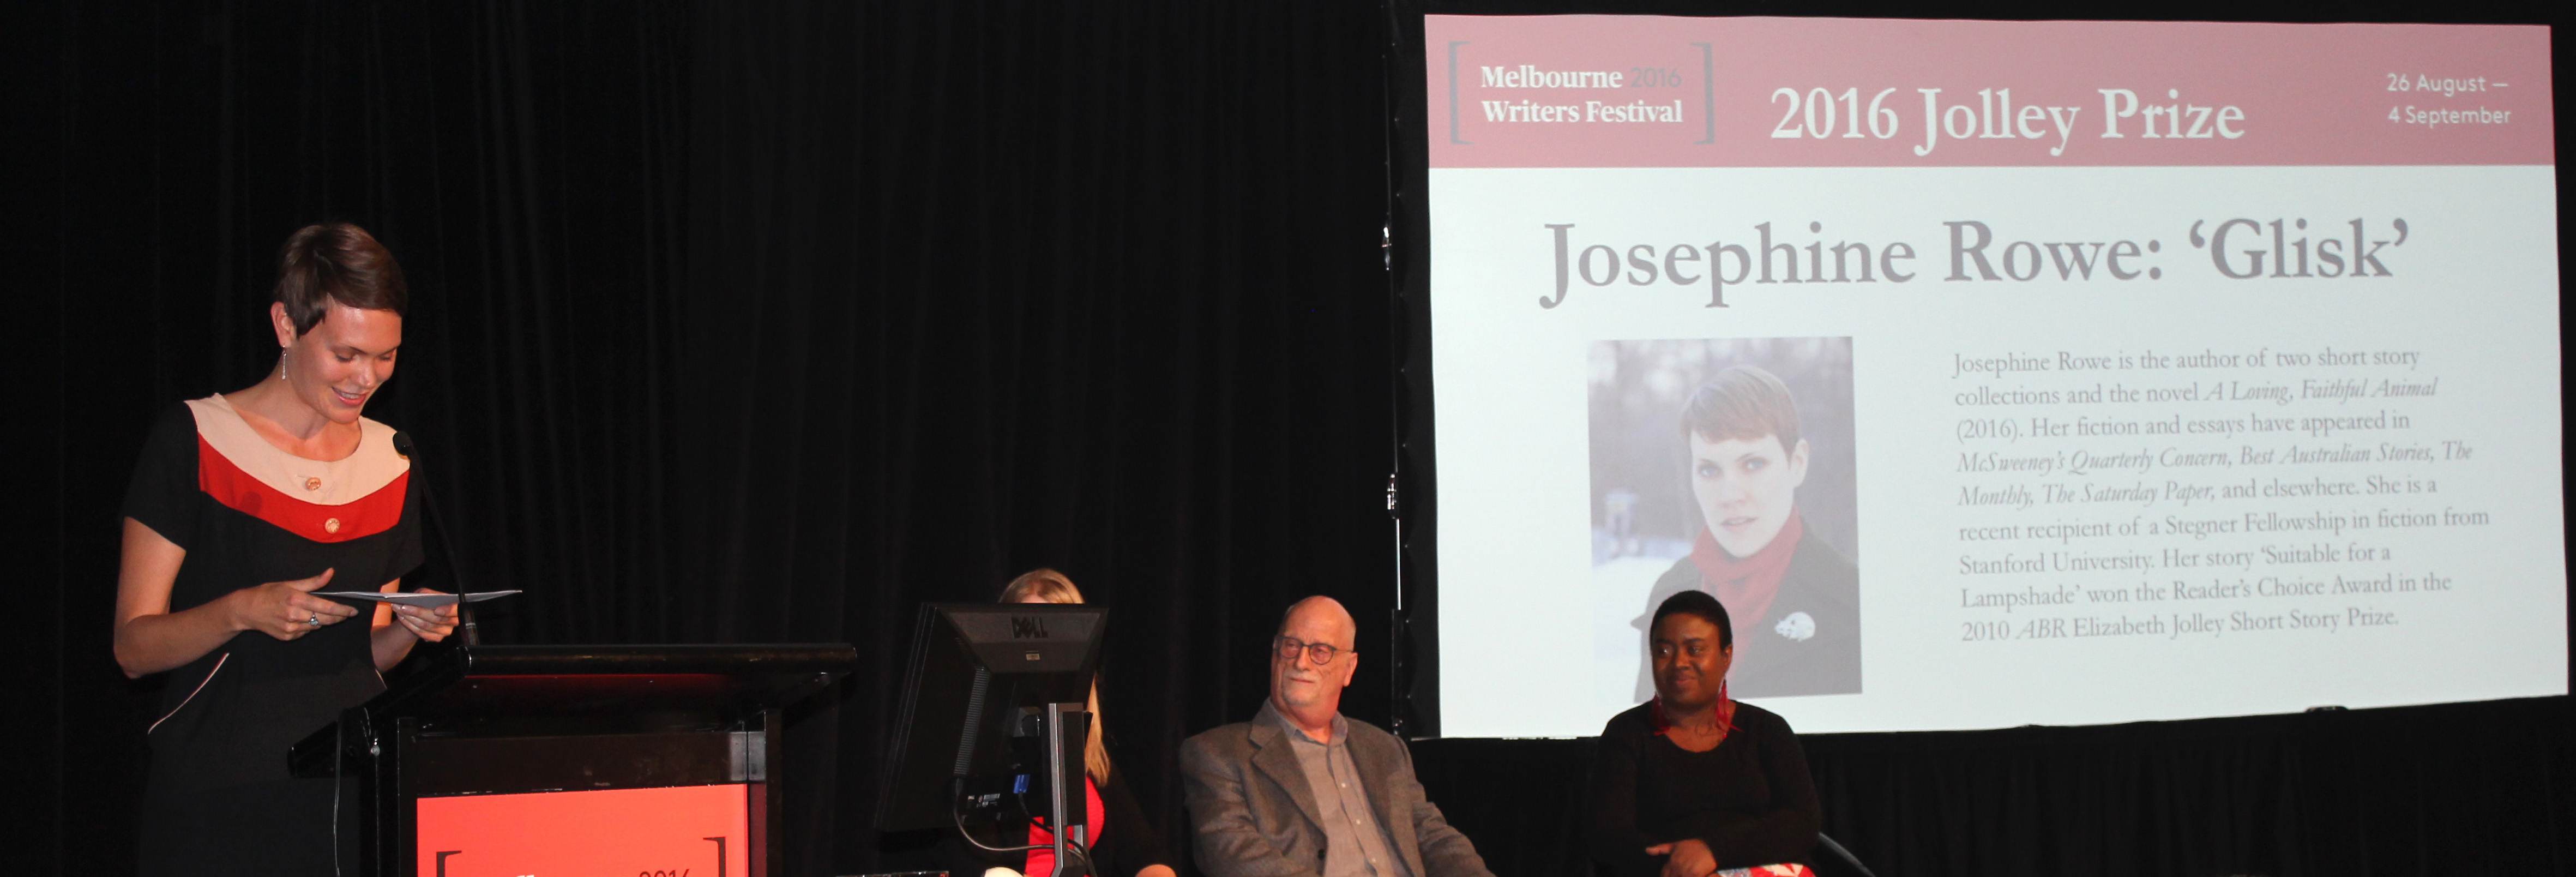 Josephine Rowe reads from her winning story 'Glisk' at the 2016 Jolley Prize ceremony at the Melbourne Writers Festival